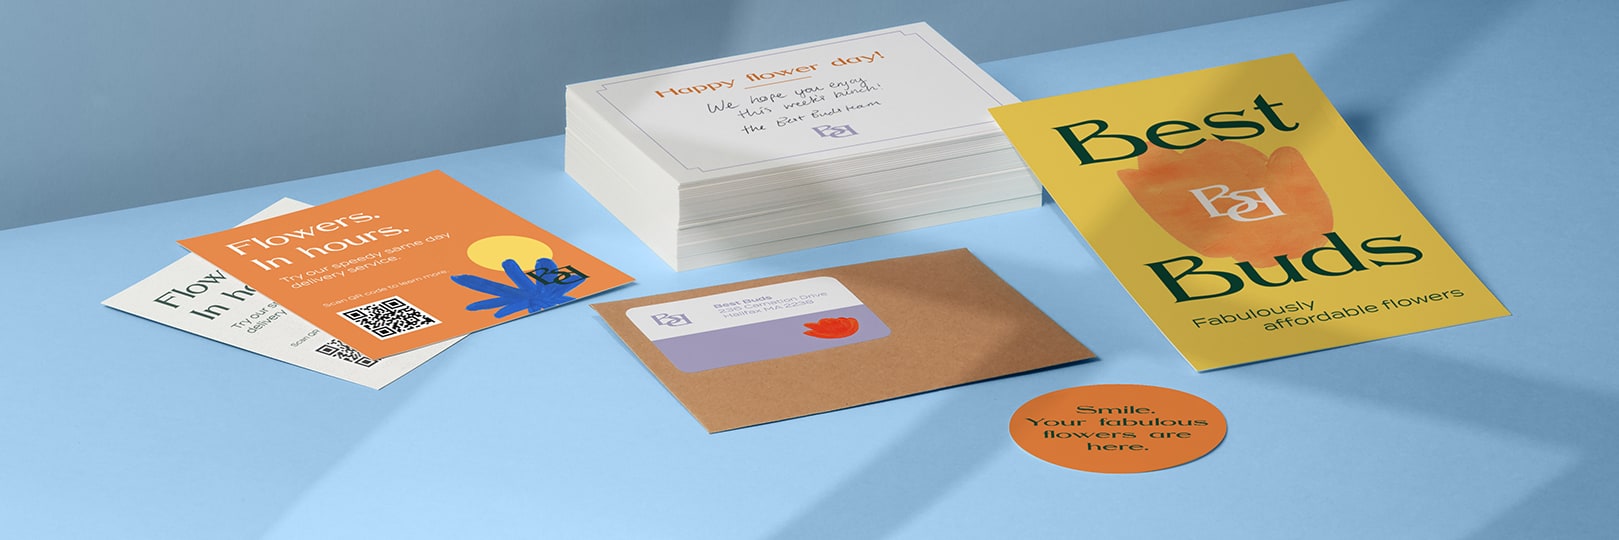 Orange and yellow flyers, postcards and round sticker next to a pile of white postcards and a brown craft envelope by fictional brand Best Buds